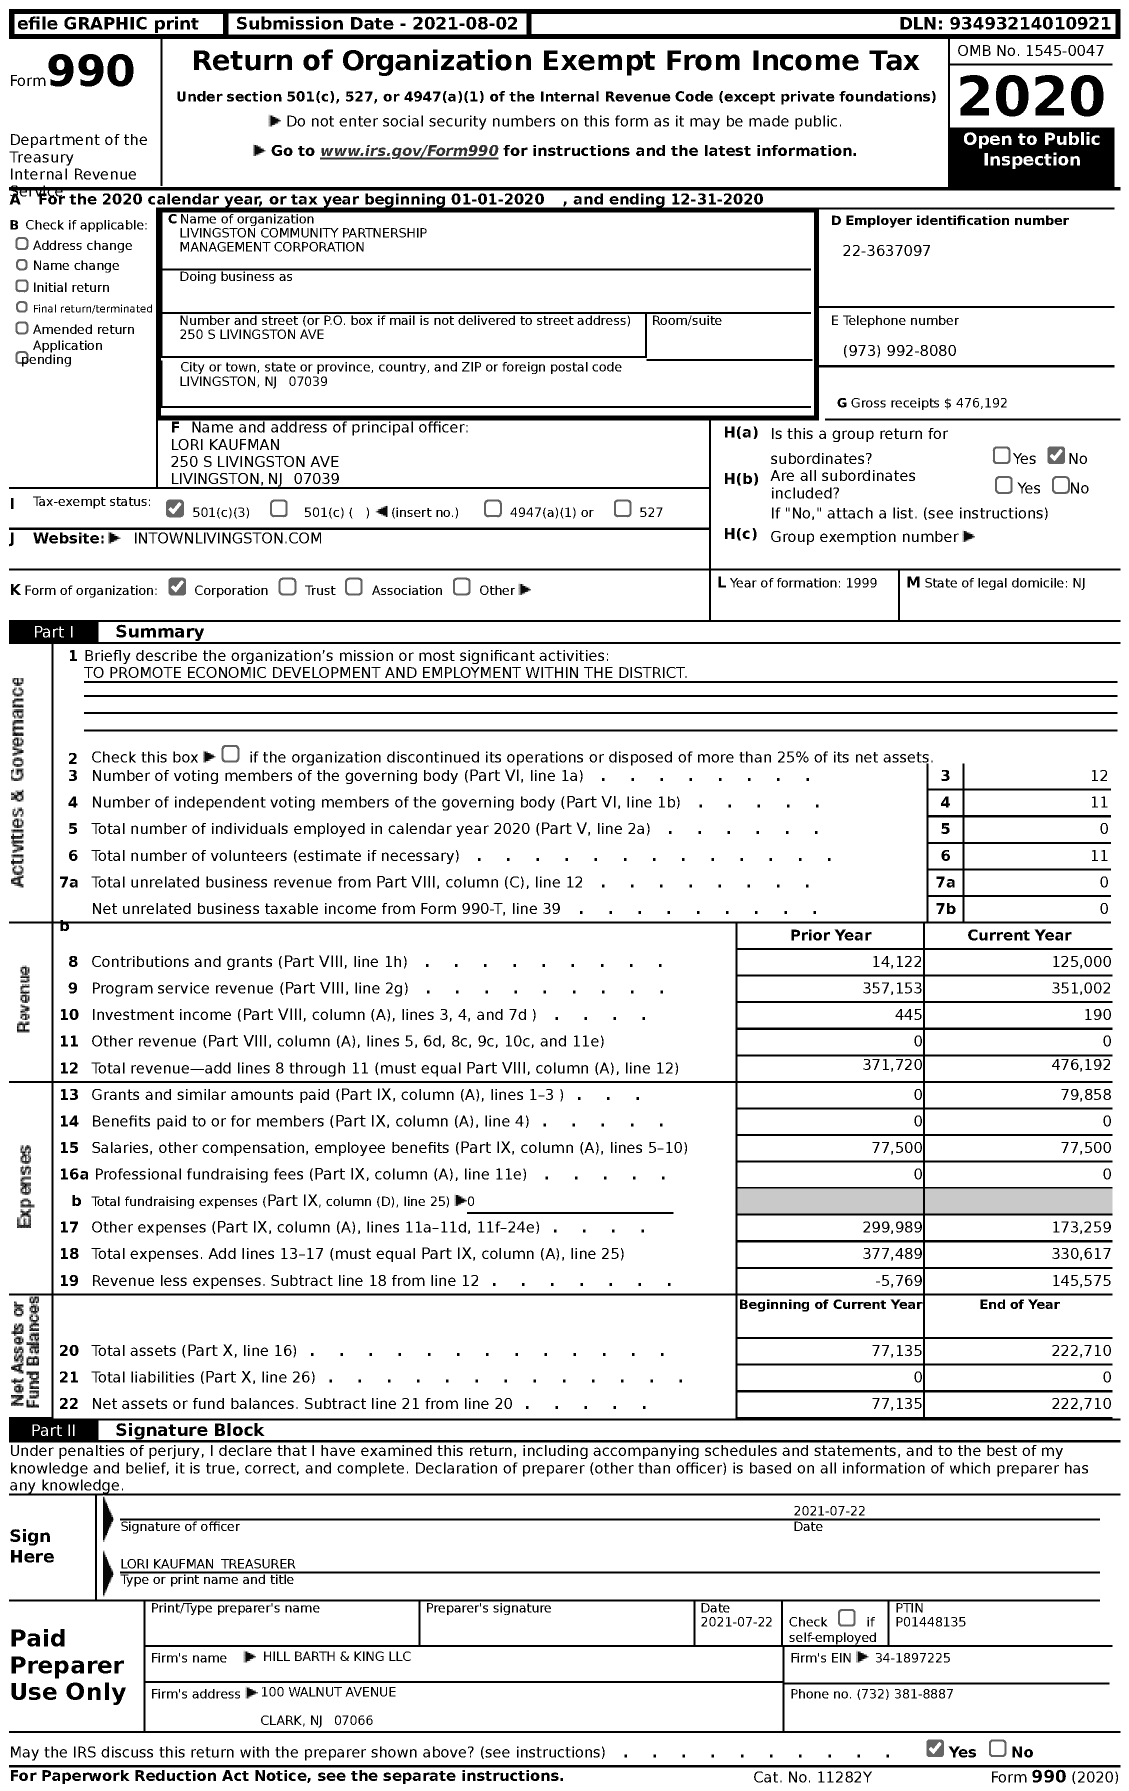 Image of first page of 2020 Form 990 for Livingston Community Partnership Management Corporation